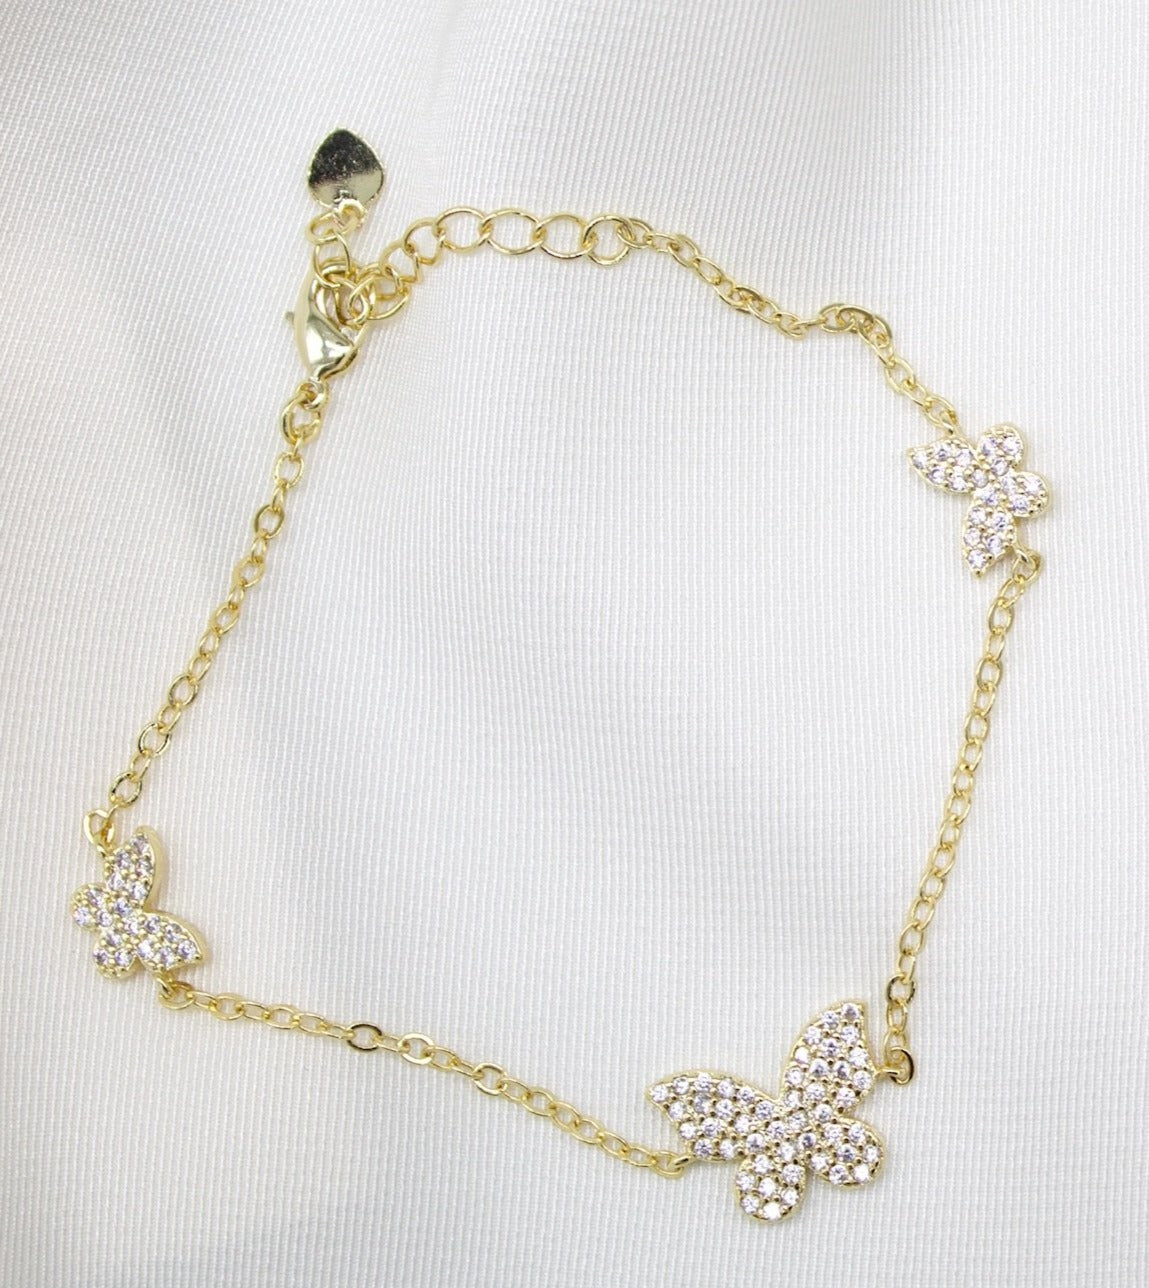 18K Gold Filled Rolo Bracelet With Micro Pave Butterfly Charms (I11)